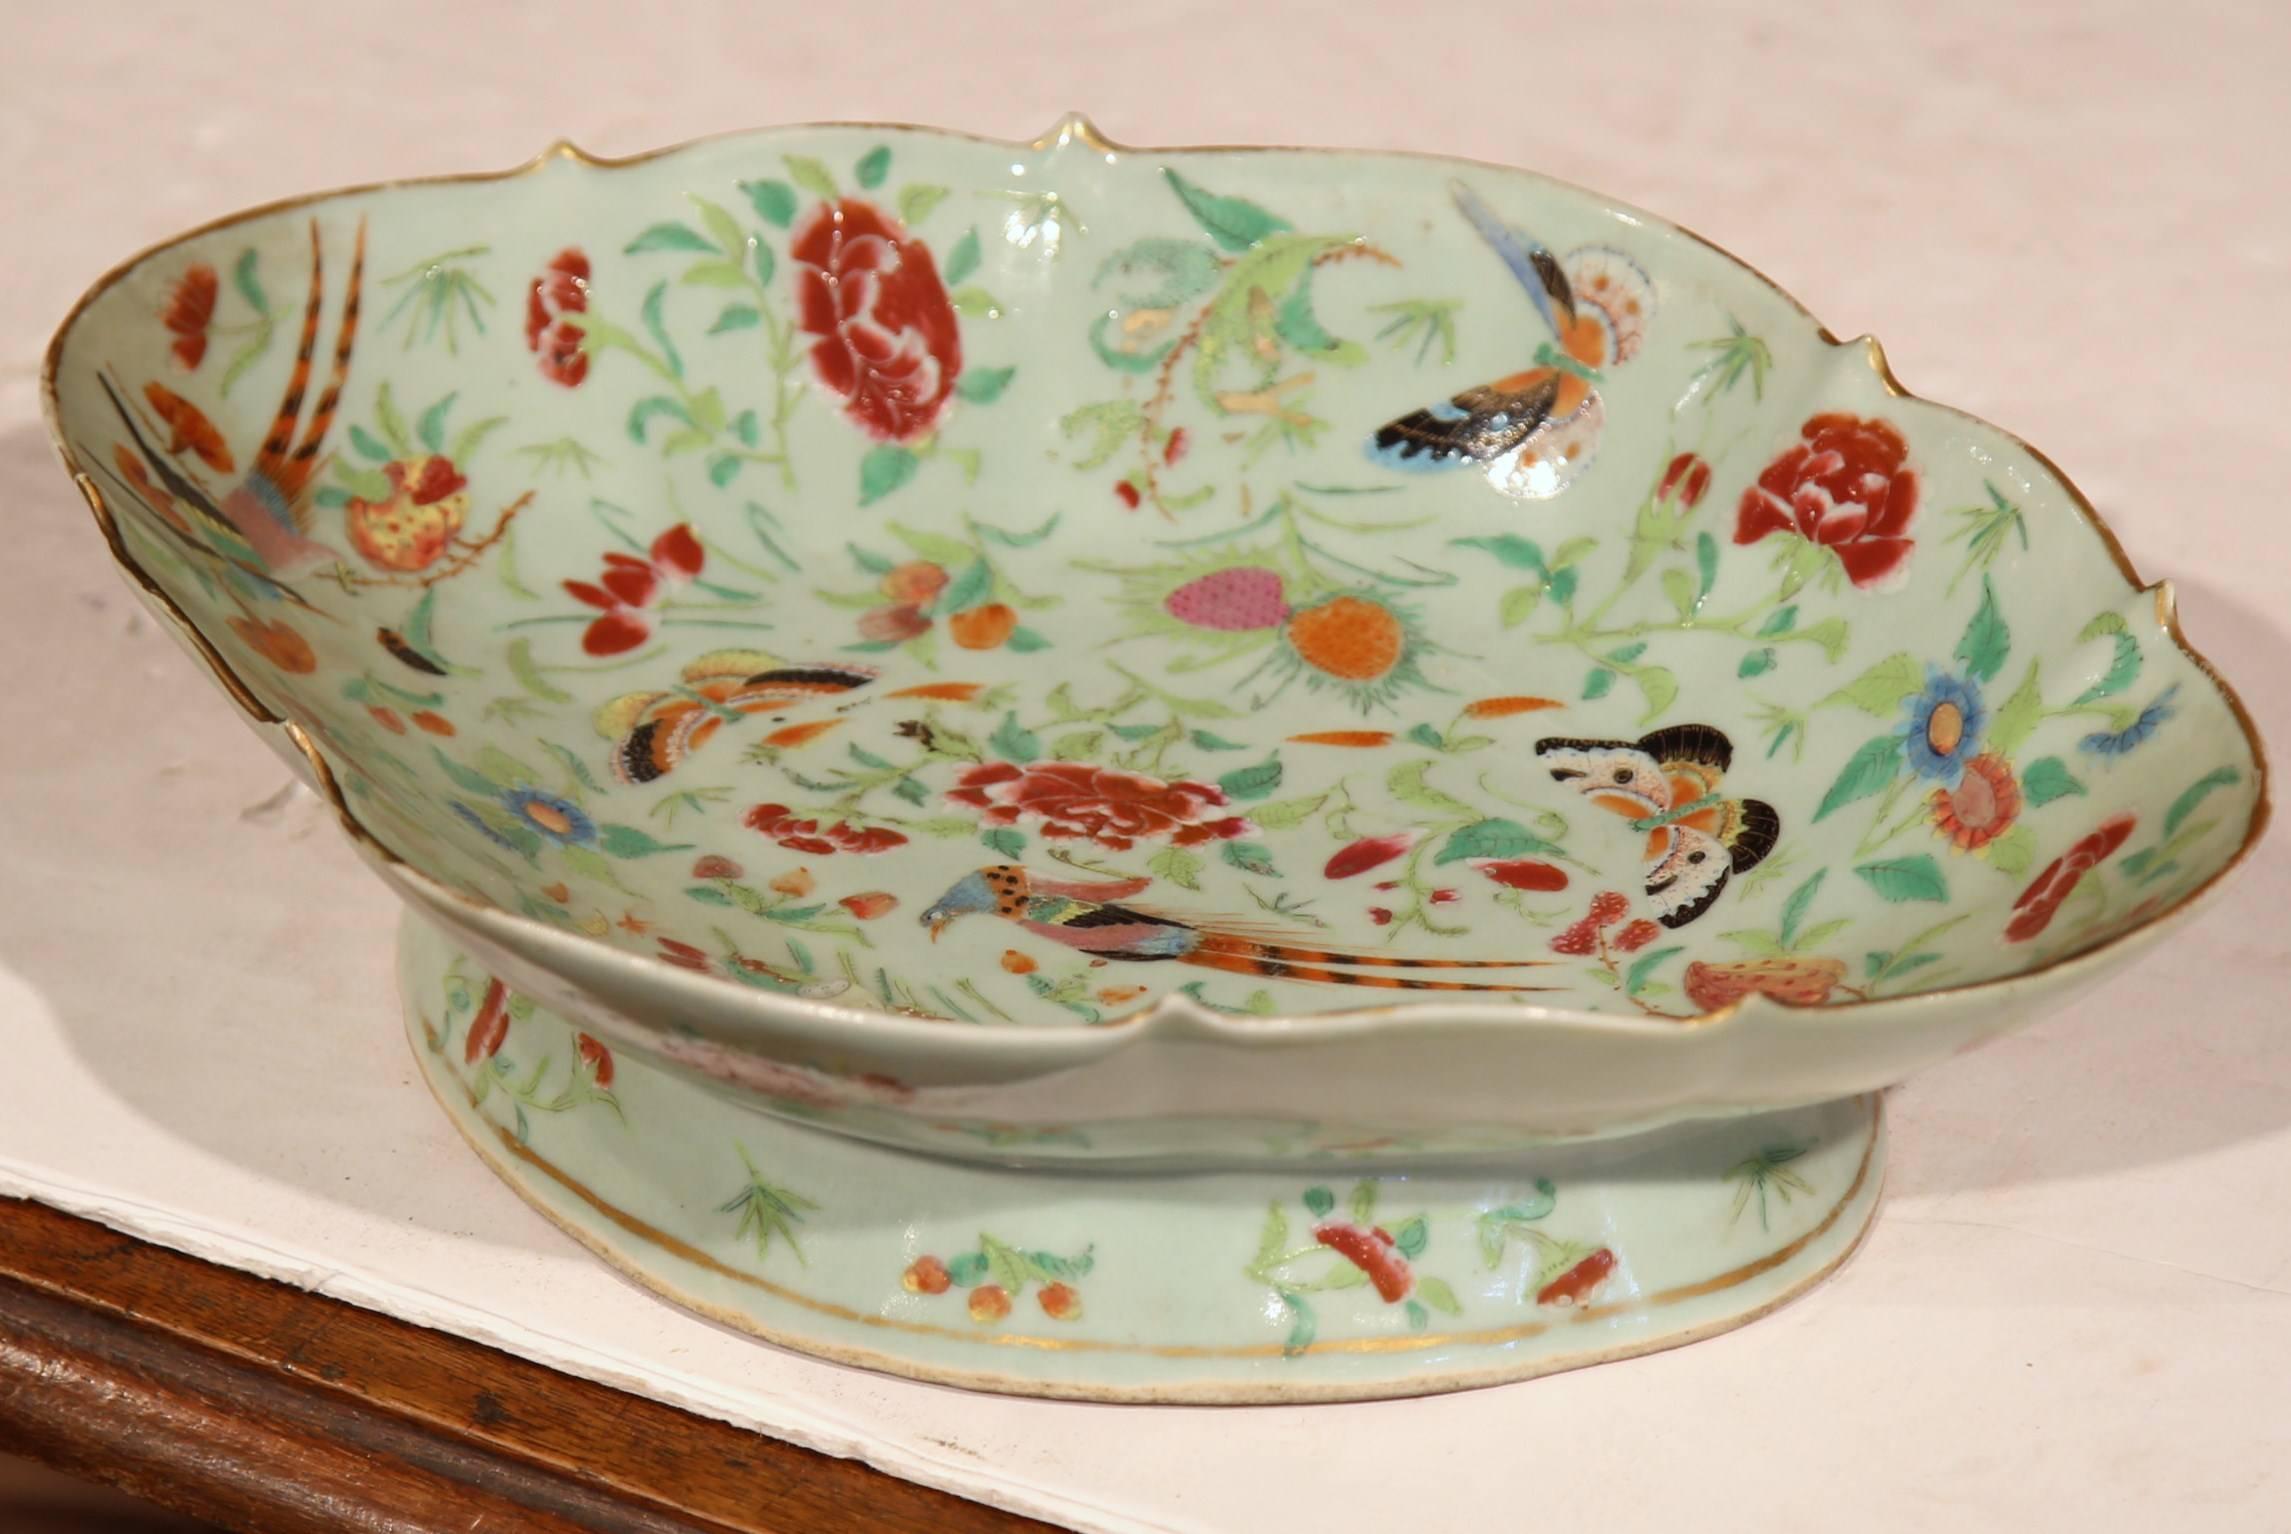 19th Century Chinese Hand-Painted Porcelain Dish with Peacocks and Butterflies 3